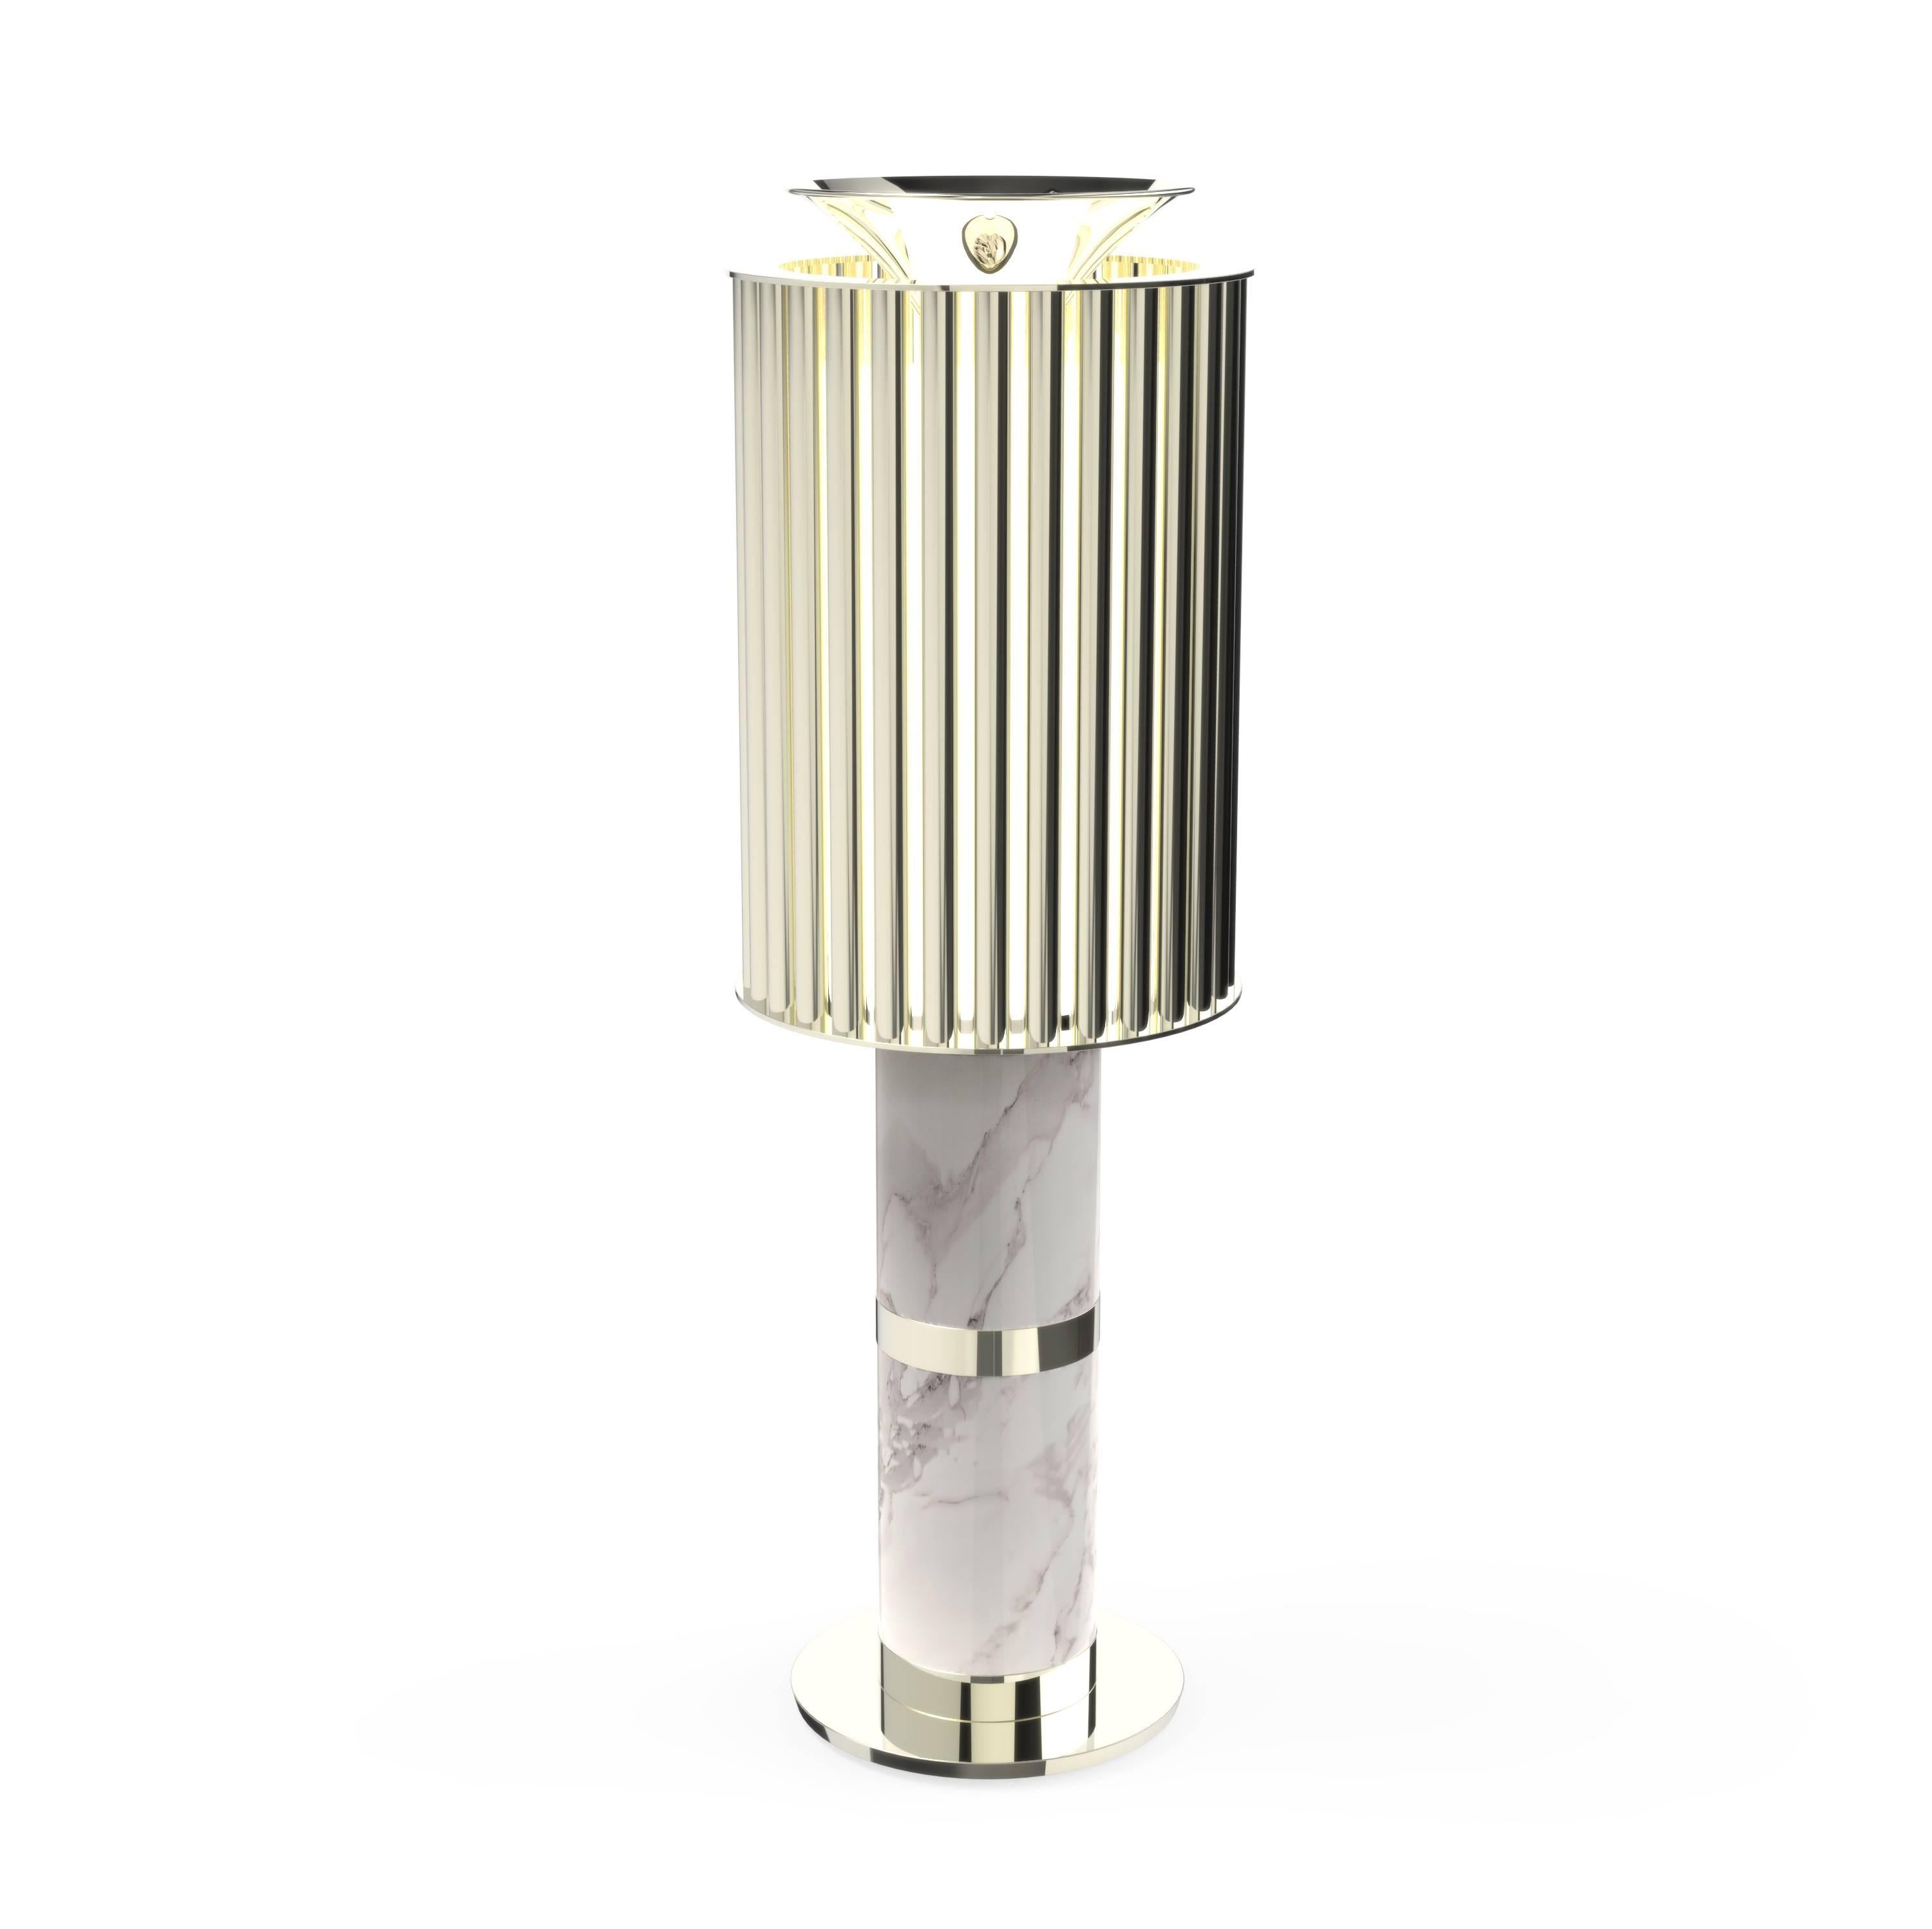 This noble and elegant piece boasts a patterned composition of straight brass tubes in rhythm with the irregular shades of the Estremoz white marble, defining the jazzy saxophone melody creating a beautiful match for the classiest environments.